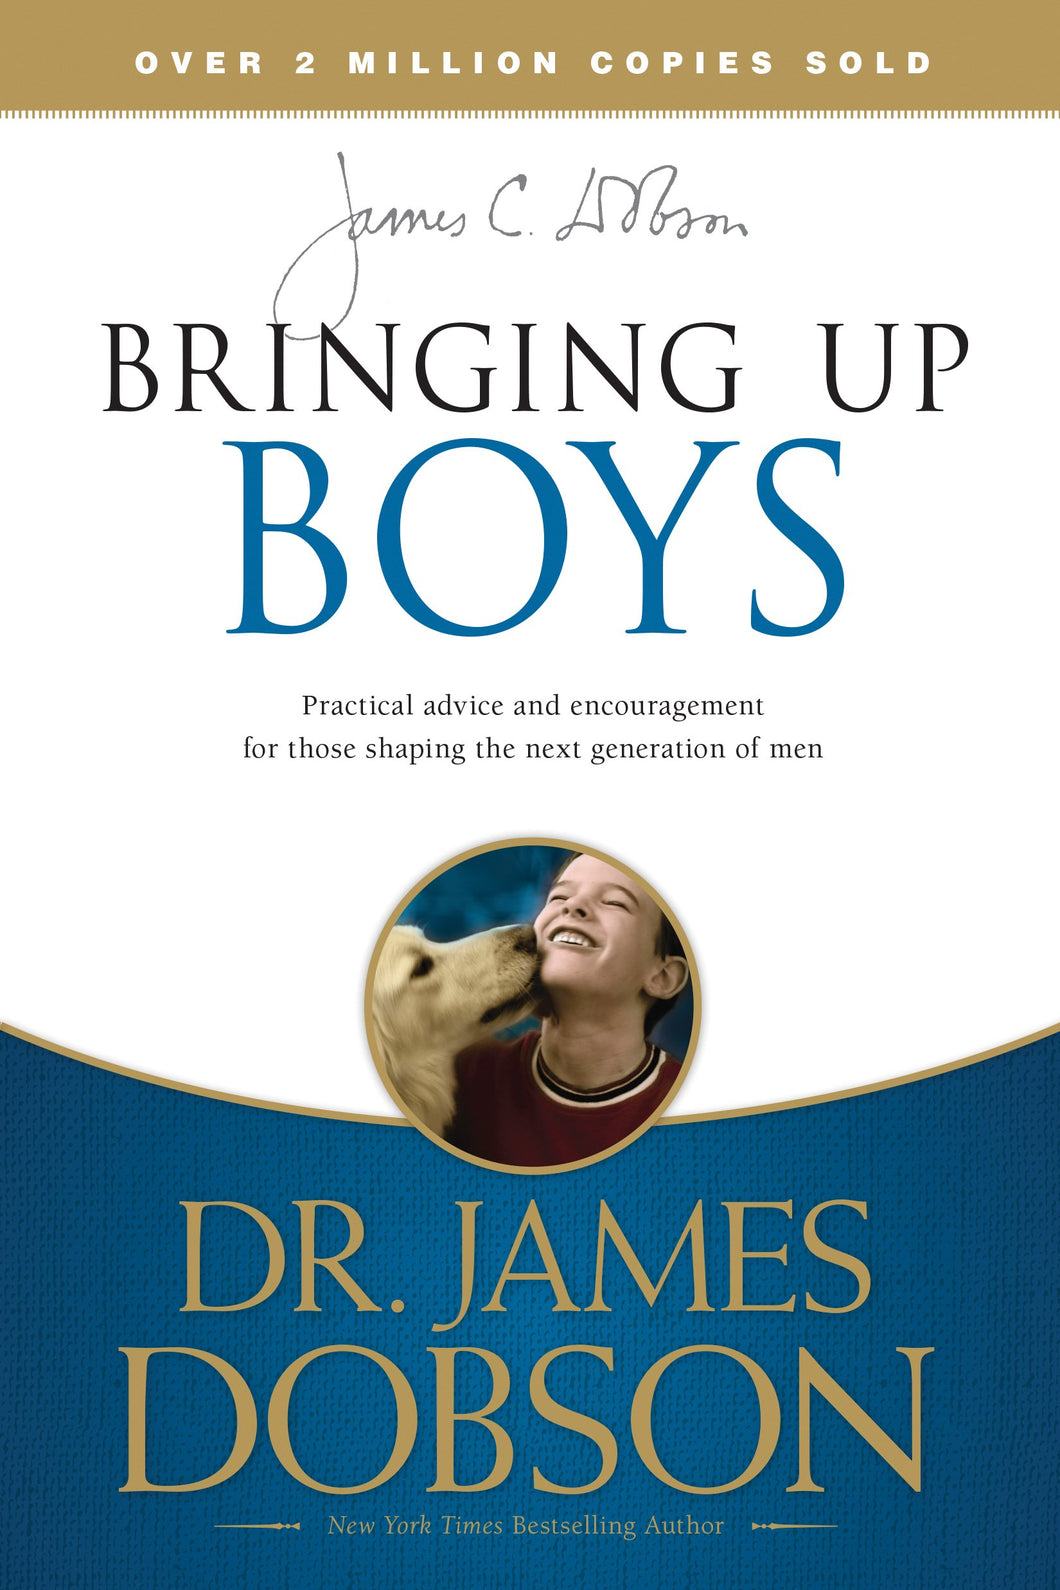 Bringing Up Boys Practical Advice and Encouragement for Those Shaping the Next Generation of Men